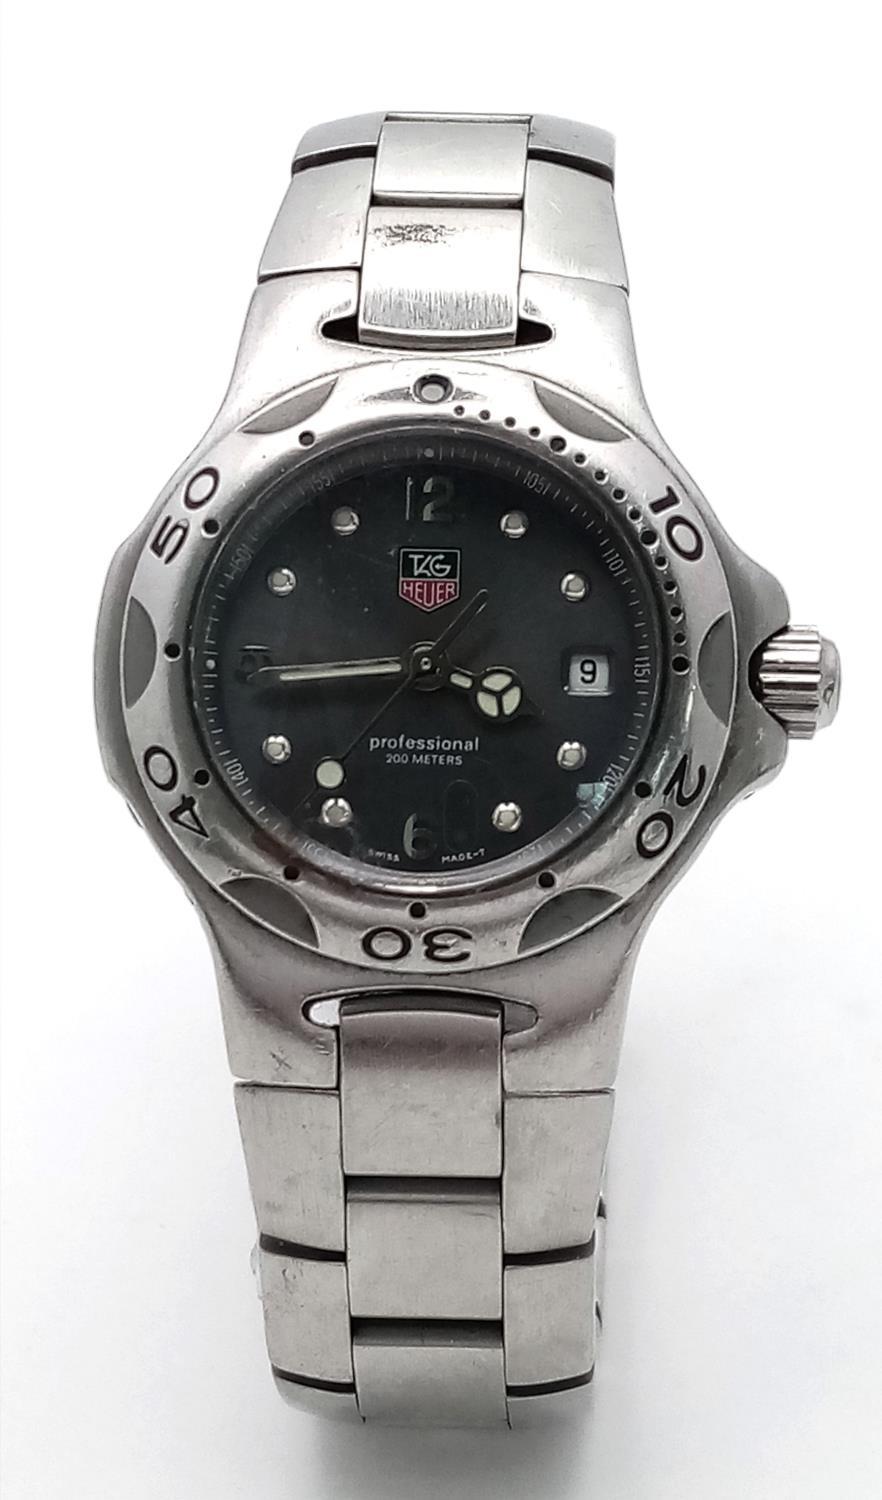 A Tag Heuer Professional Ladies Quartz Watch. Stainless steel bracelet and case - 28mm. Grey dial - Image 2 of 8